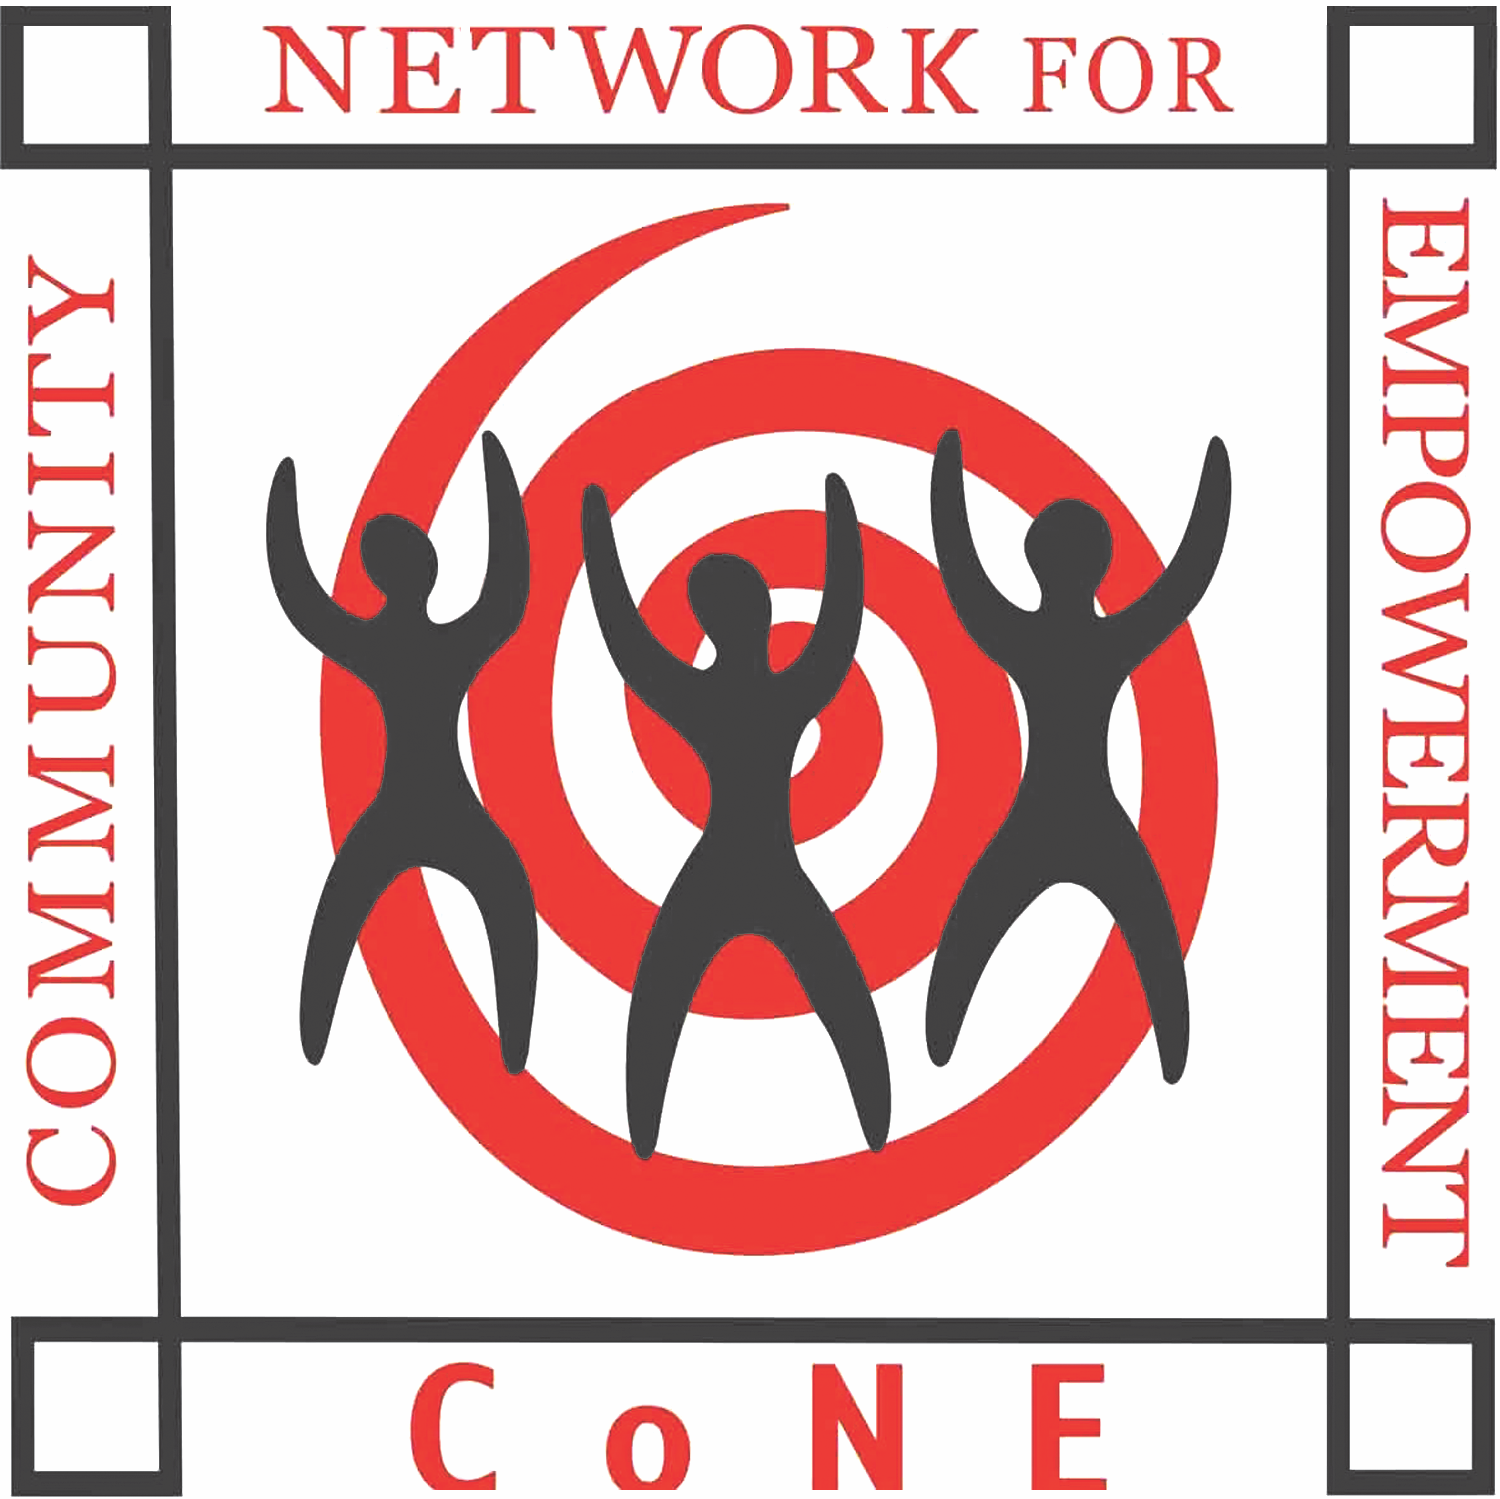 2. Community Network for Empowerment